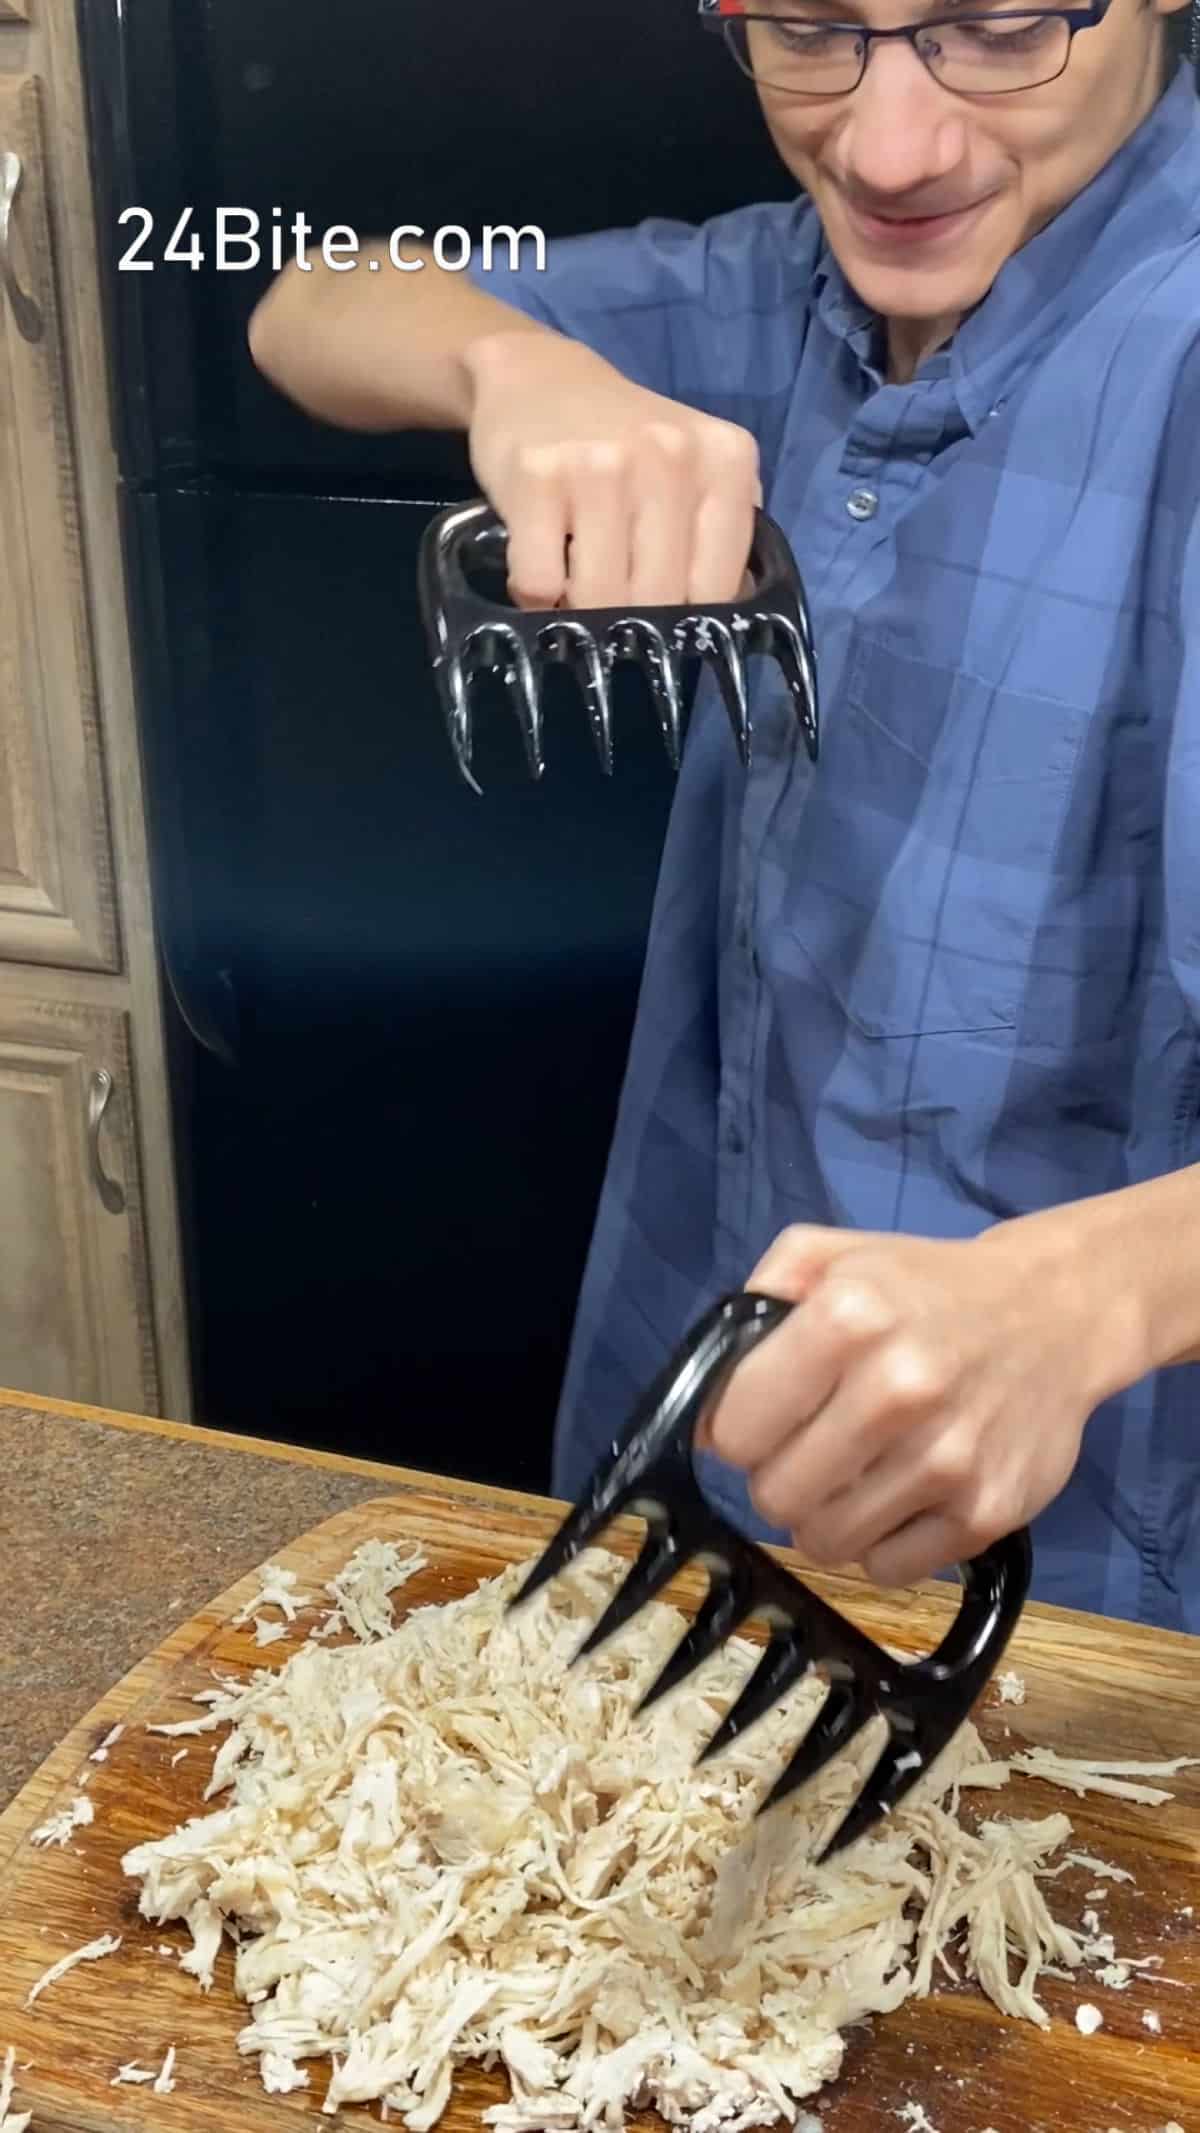 Christian Guzman using meat shredding claws to shred cooked  chicken breast